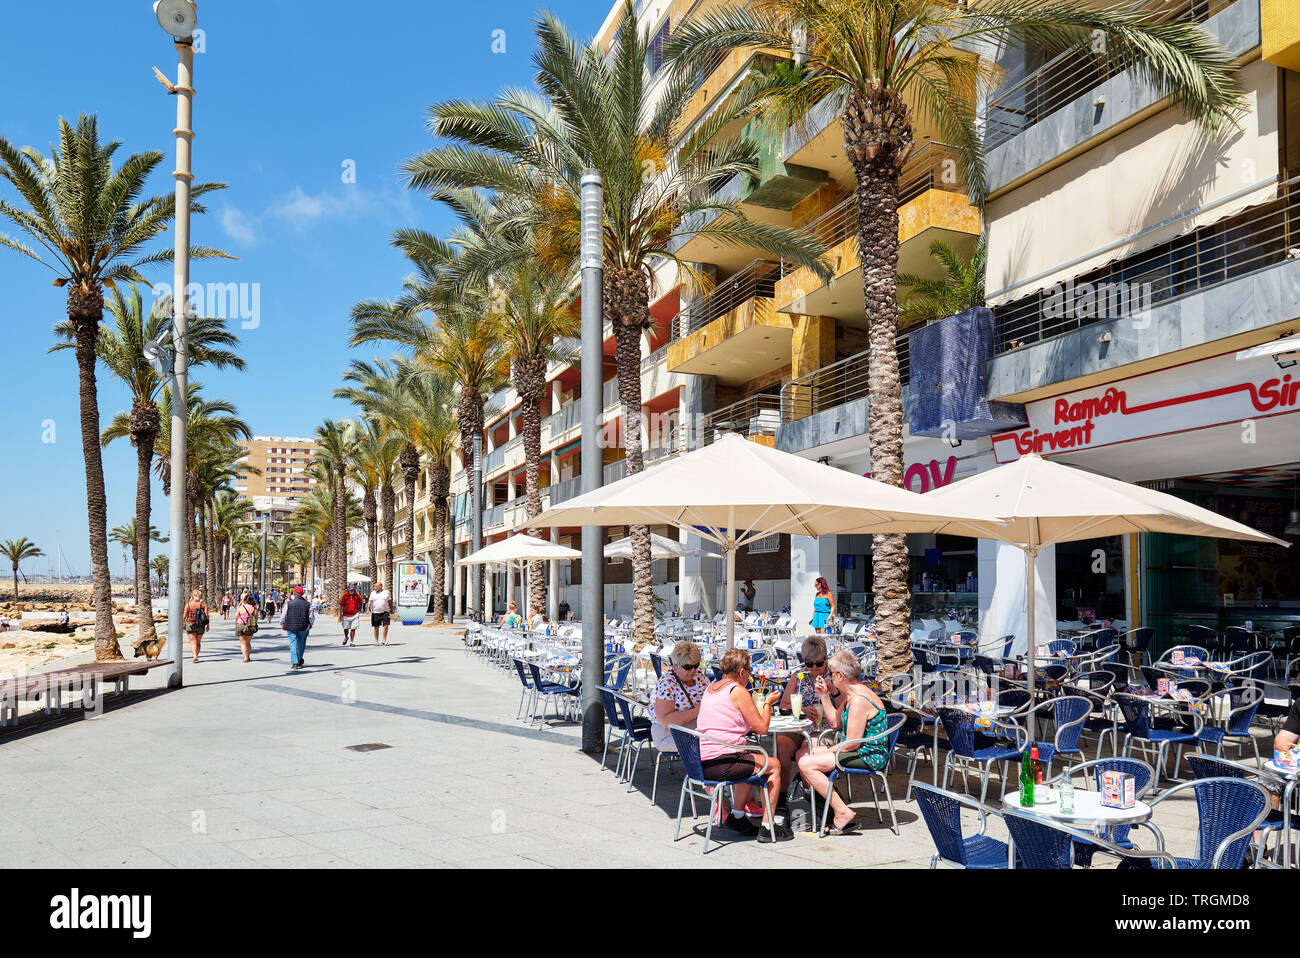 Torrevieja, Spain - May 16, 2019: People sitting in side walk cafe in the seafront promenade of Torrevieja resort city, vacationers enjoy weather Stock Photo